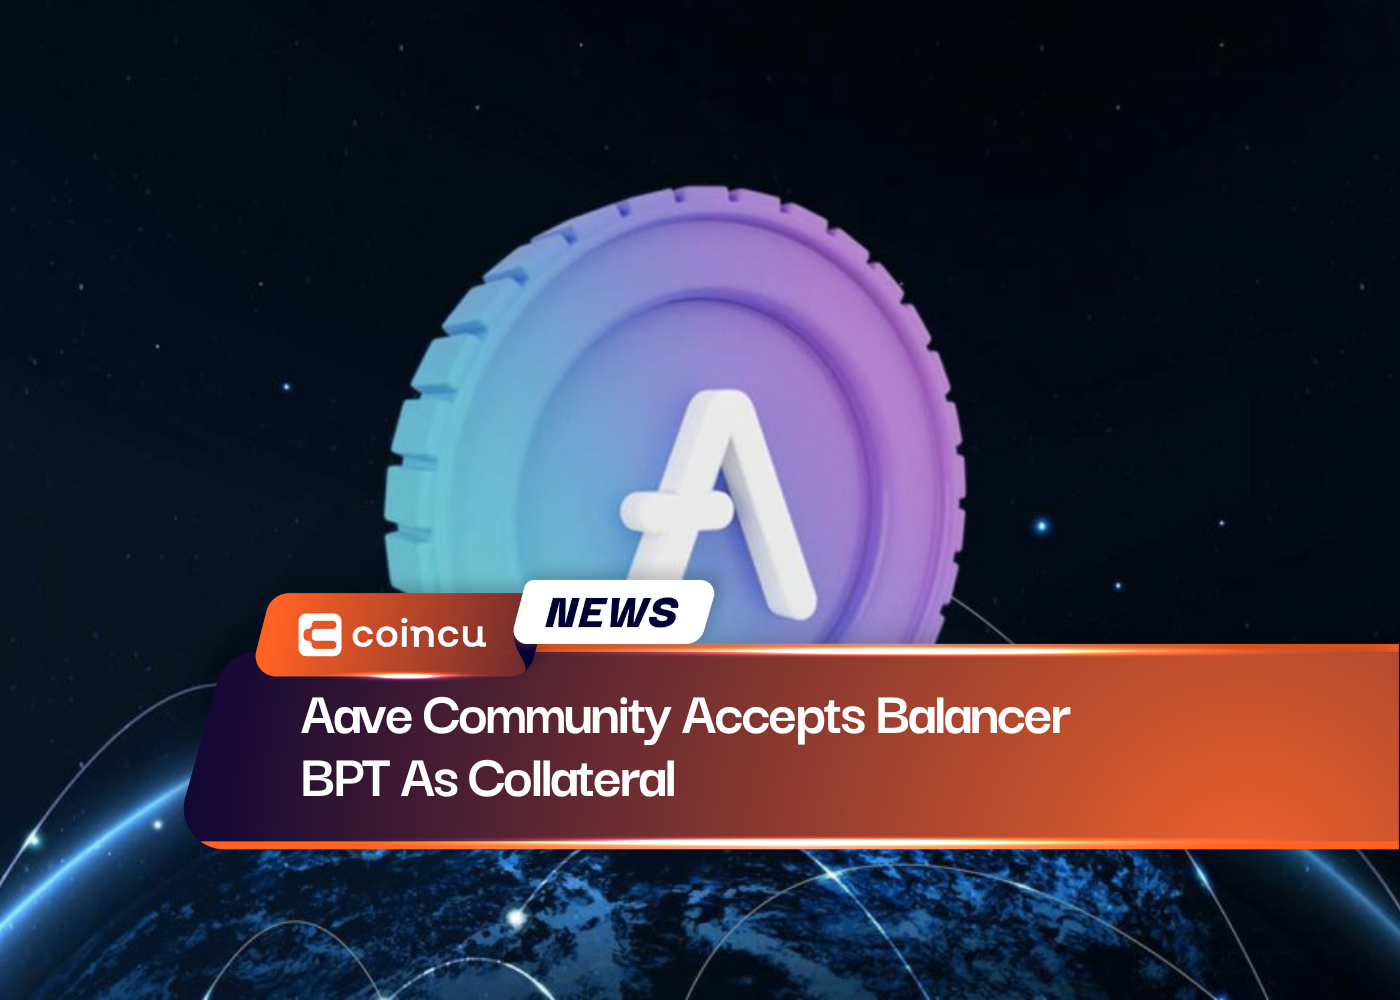 Aave Community Accepts Balancer BPT As Collateral